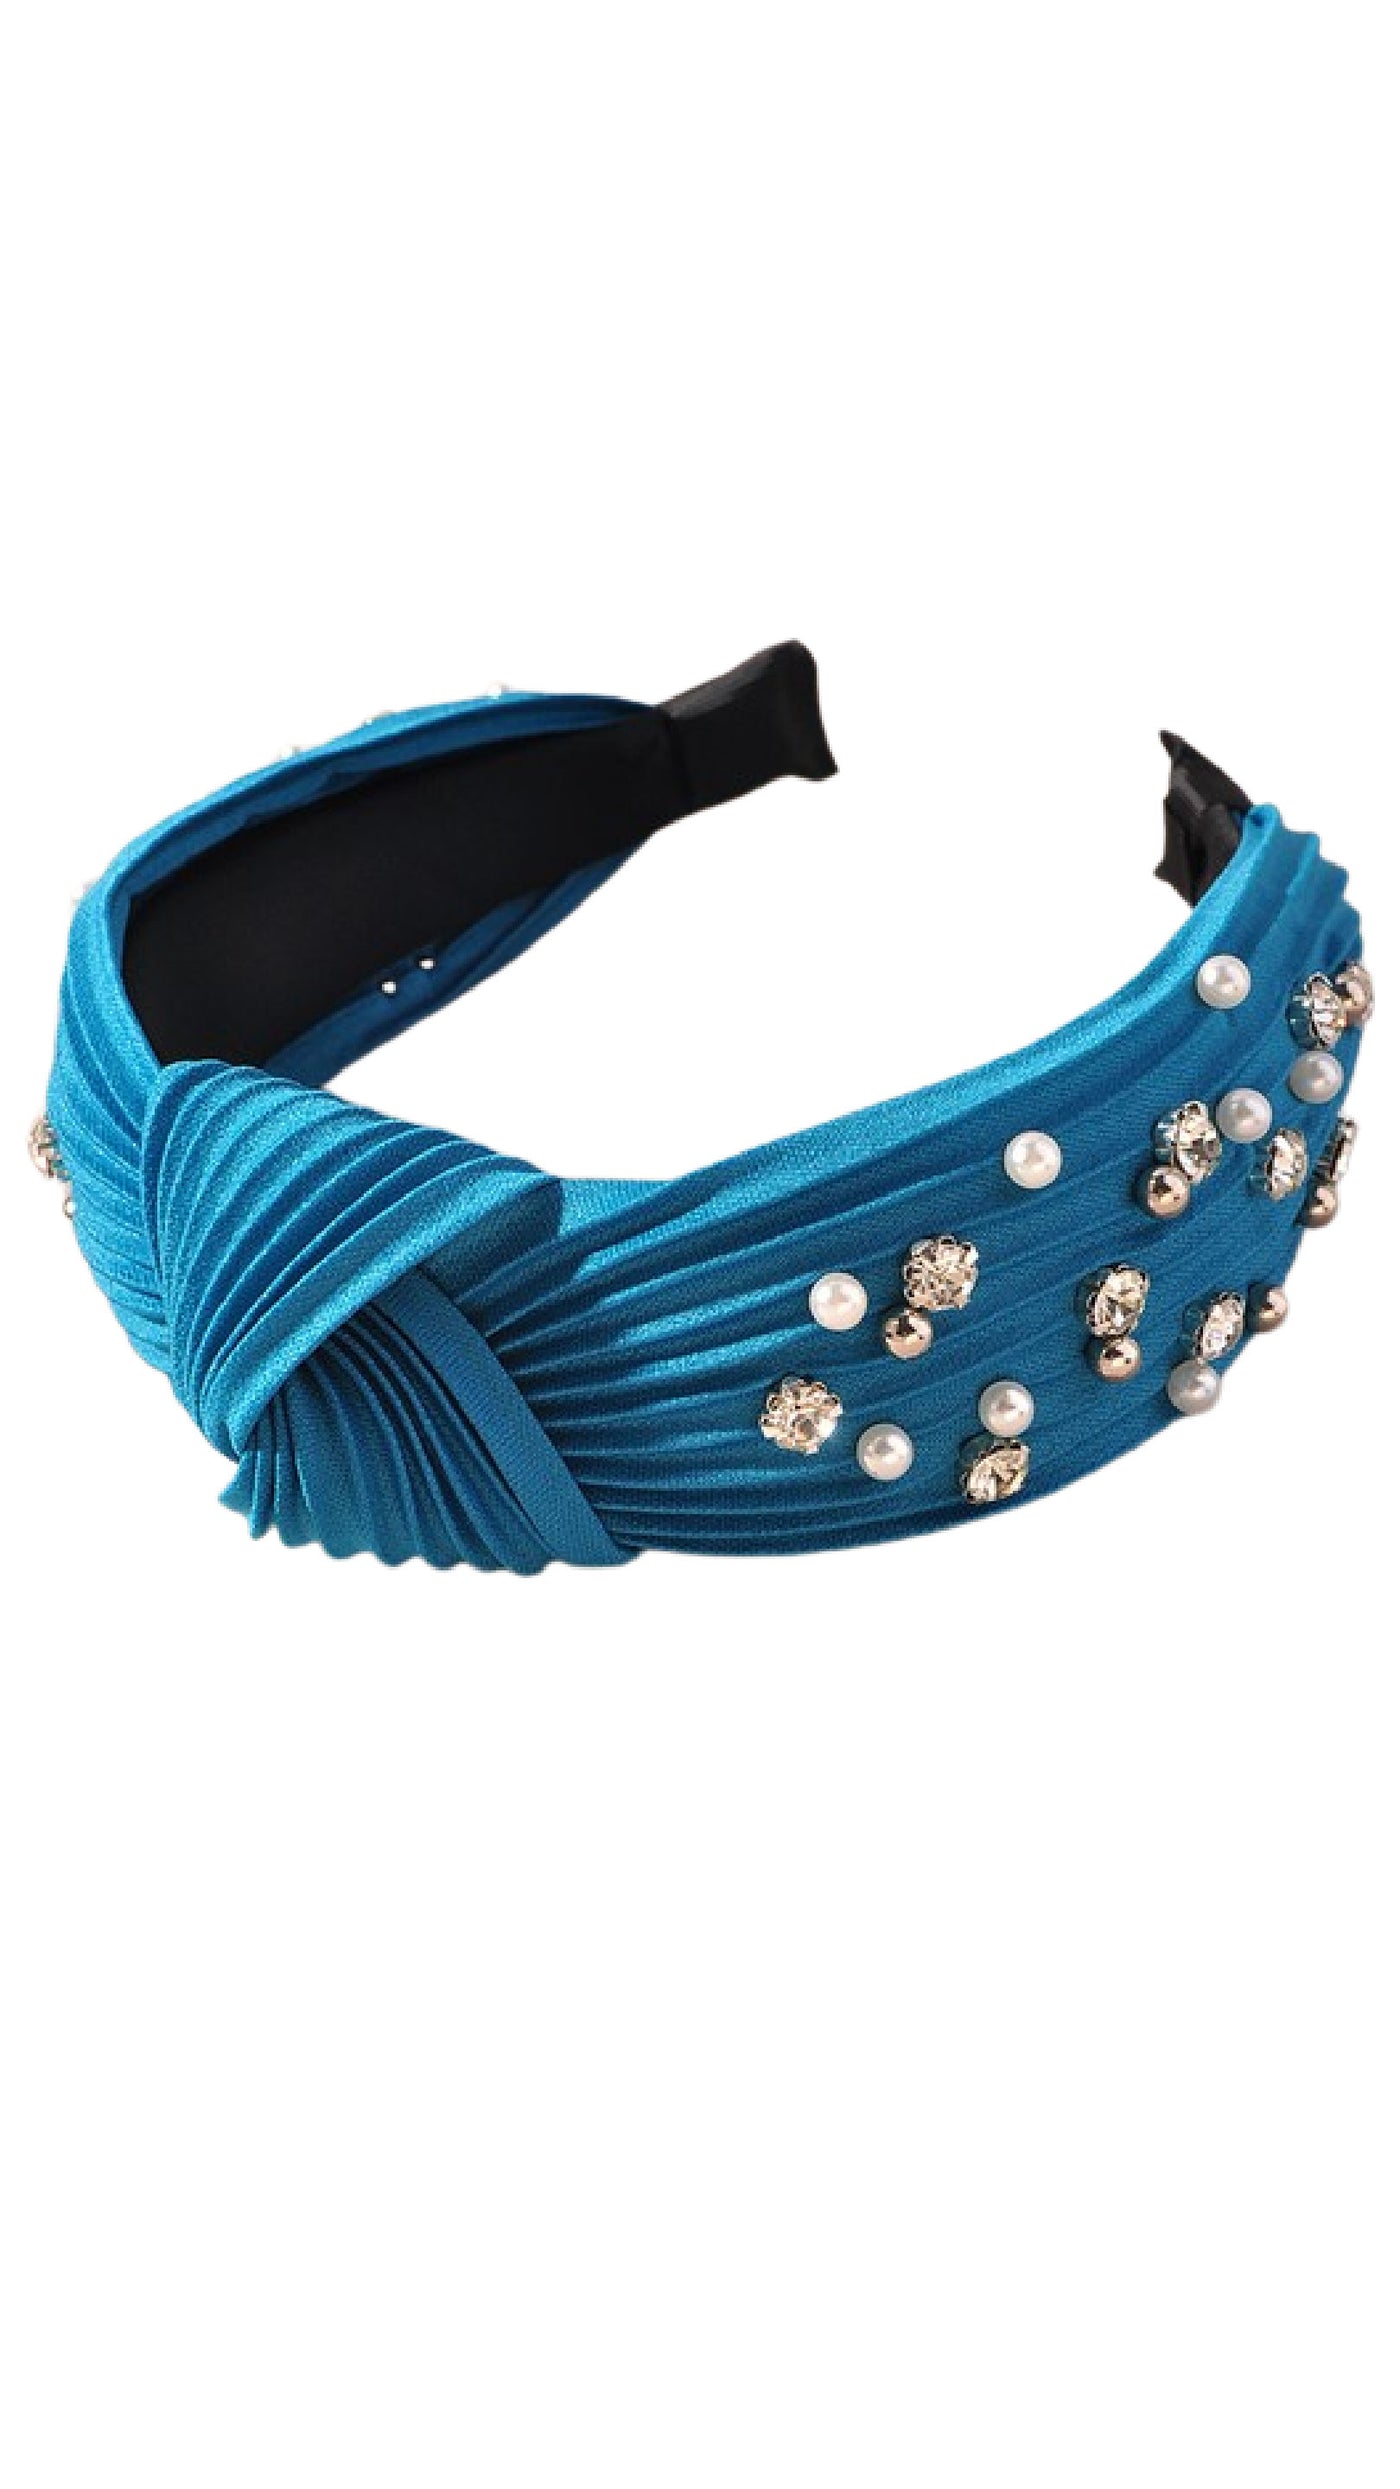 Stunning Headband - Teal - Piper and Hollow Boutique